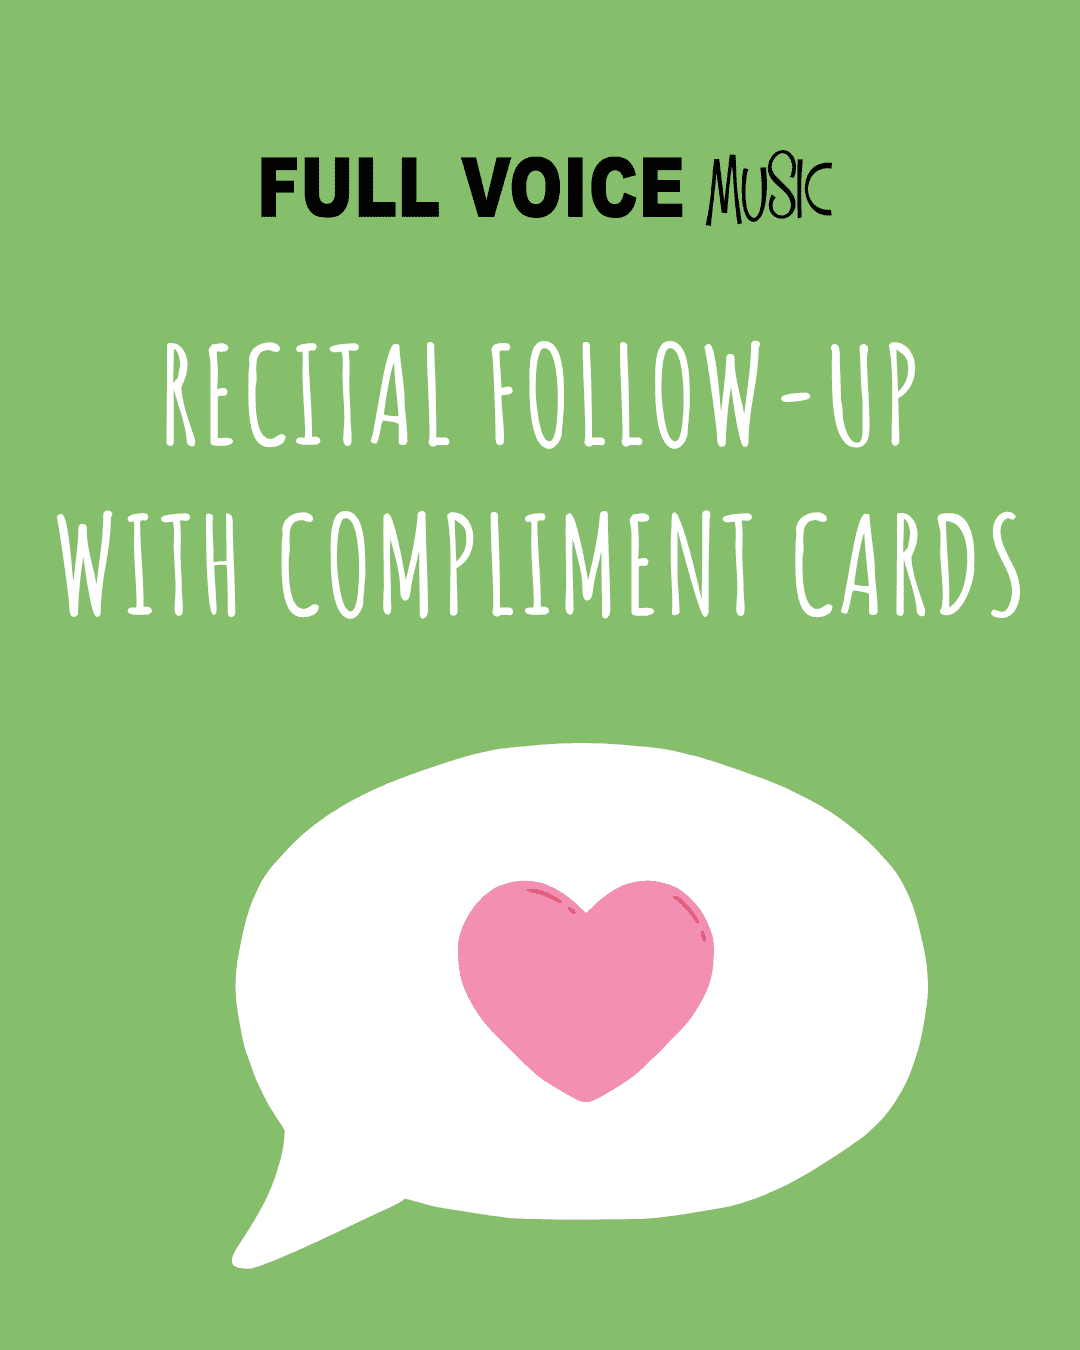 Recital follow up and compliment cards with a big heart picture